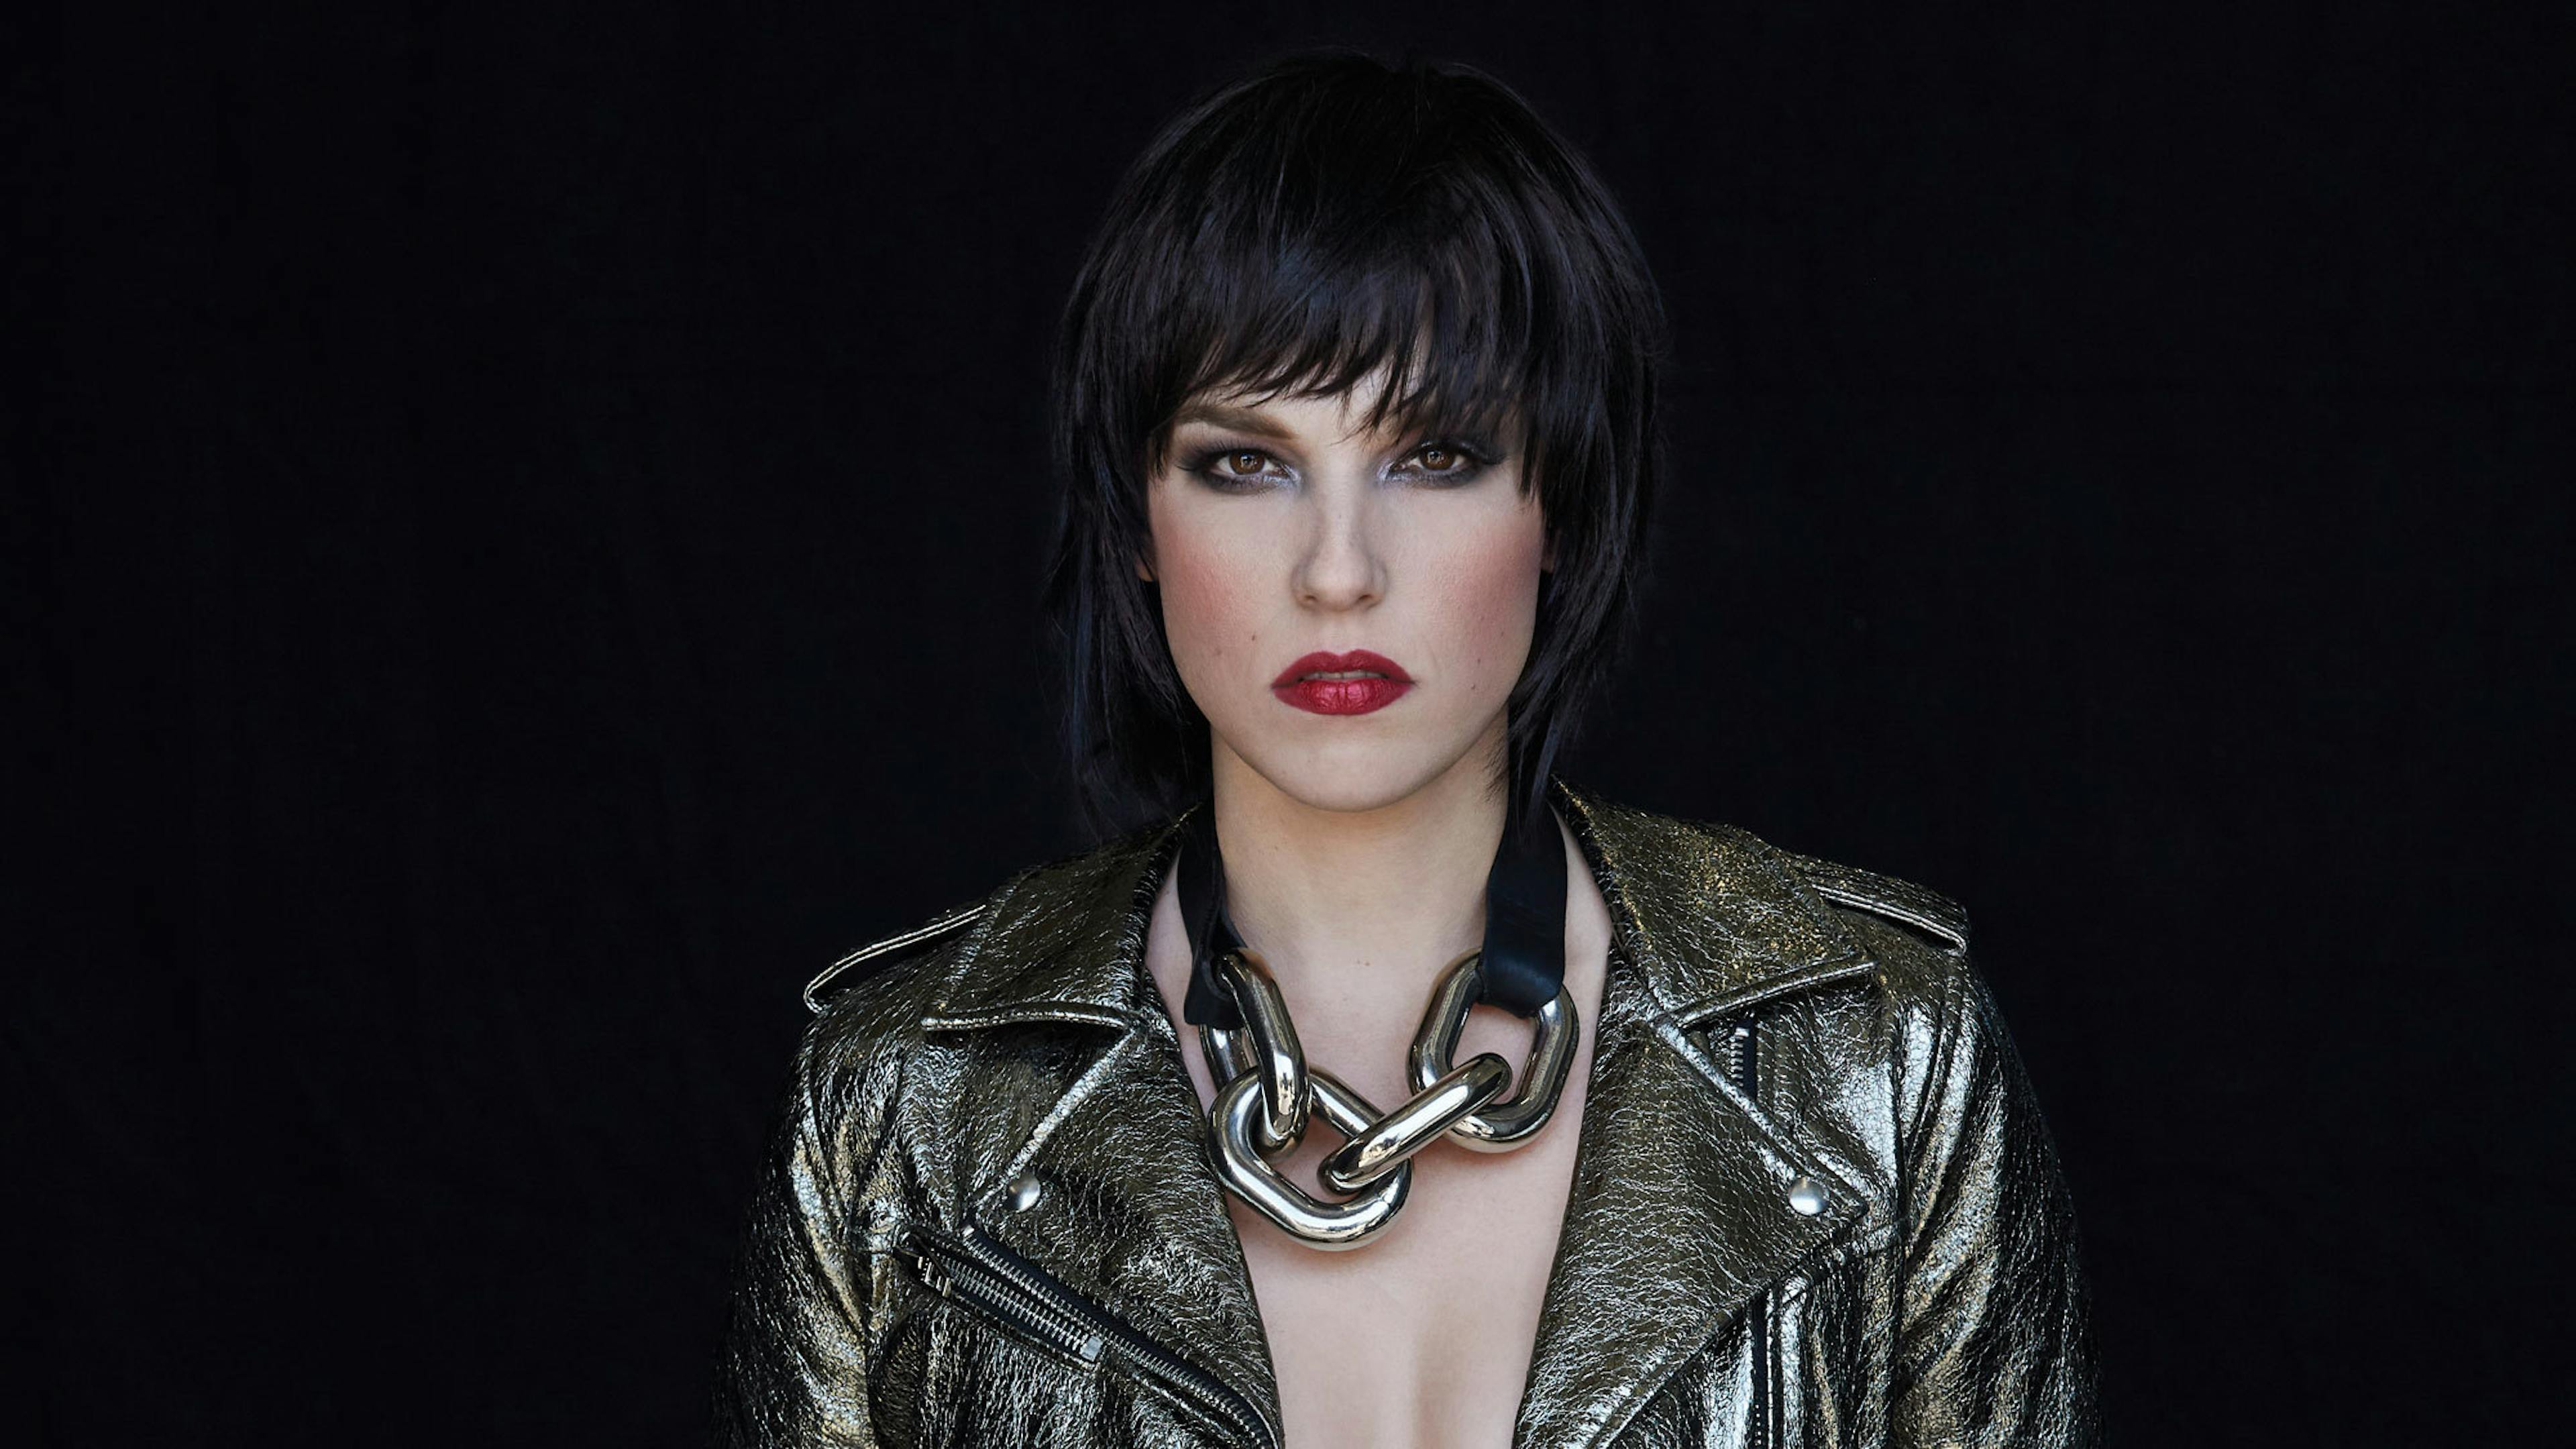 Halestorm's Lzzy Hale On Coronavirus: "It’s Important To Remember That We Are All In This Together"